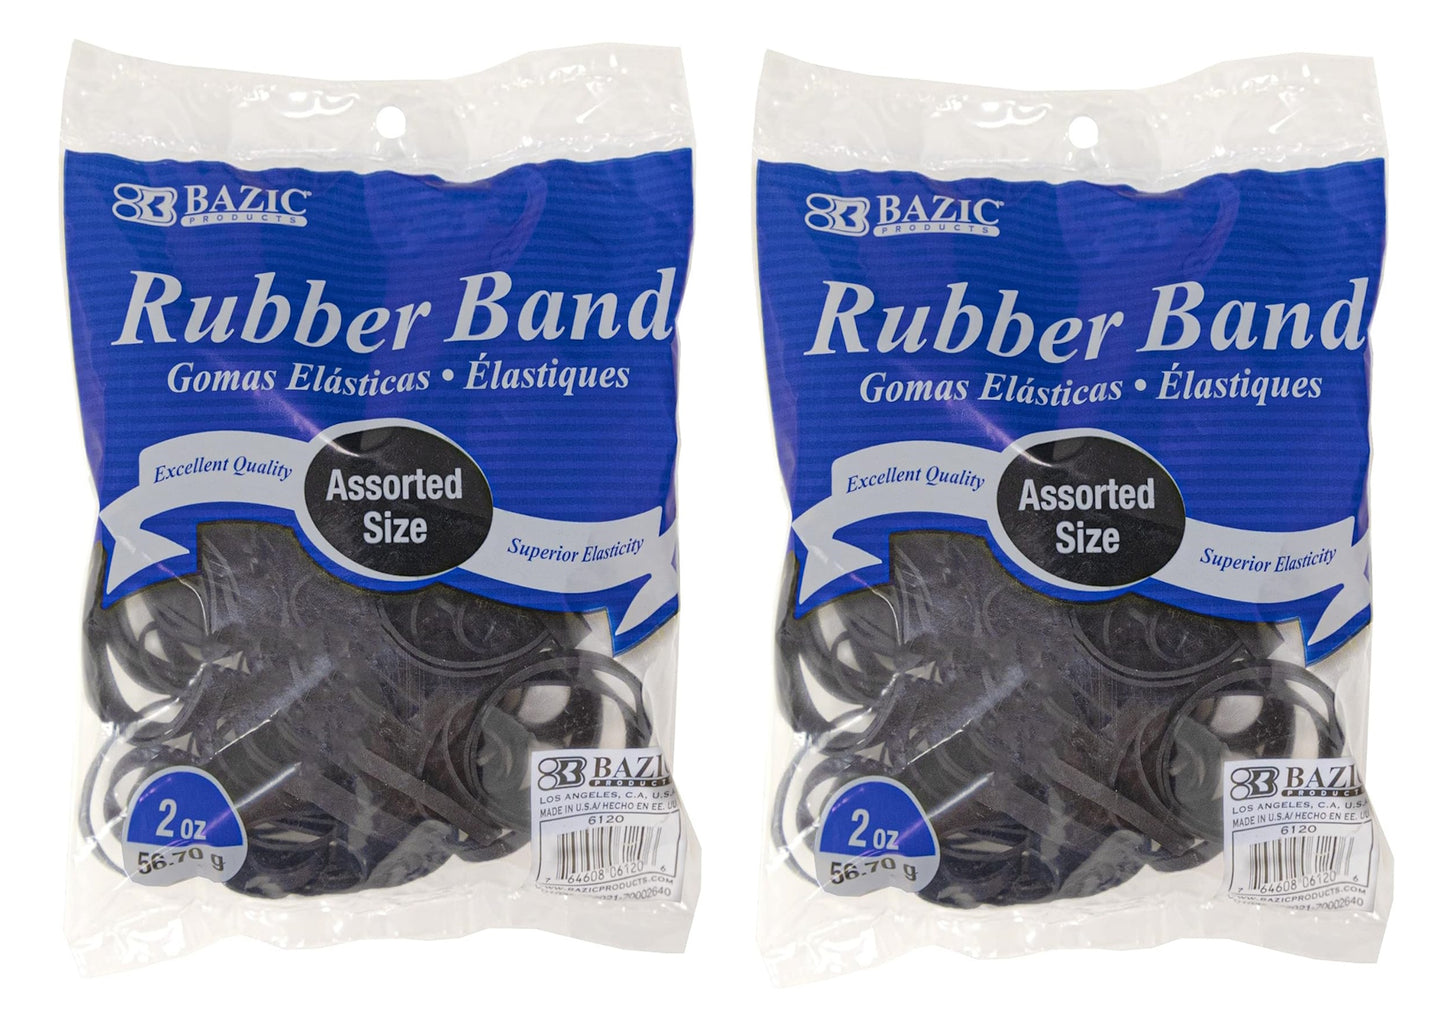 BAZIC Black Color Rubber Bands 2 Oz./ 56.70 g Assorted Sizes - Pack of 2